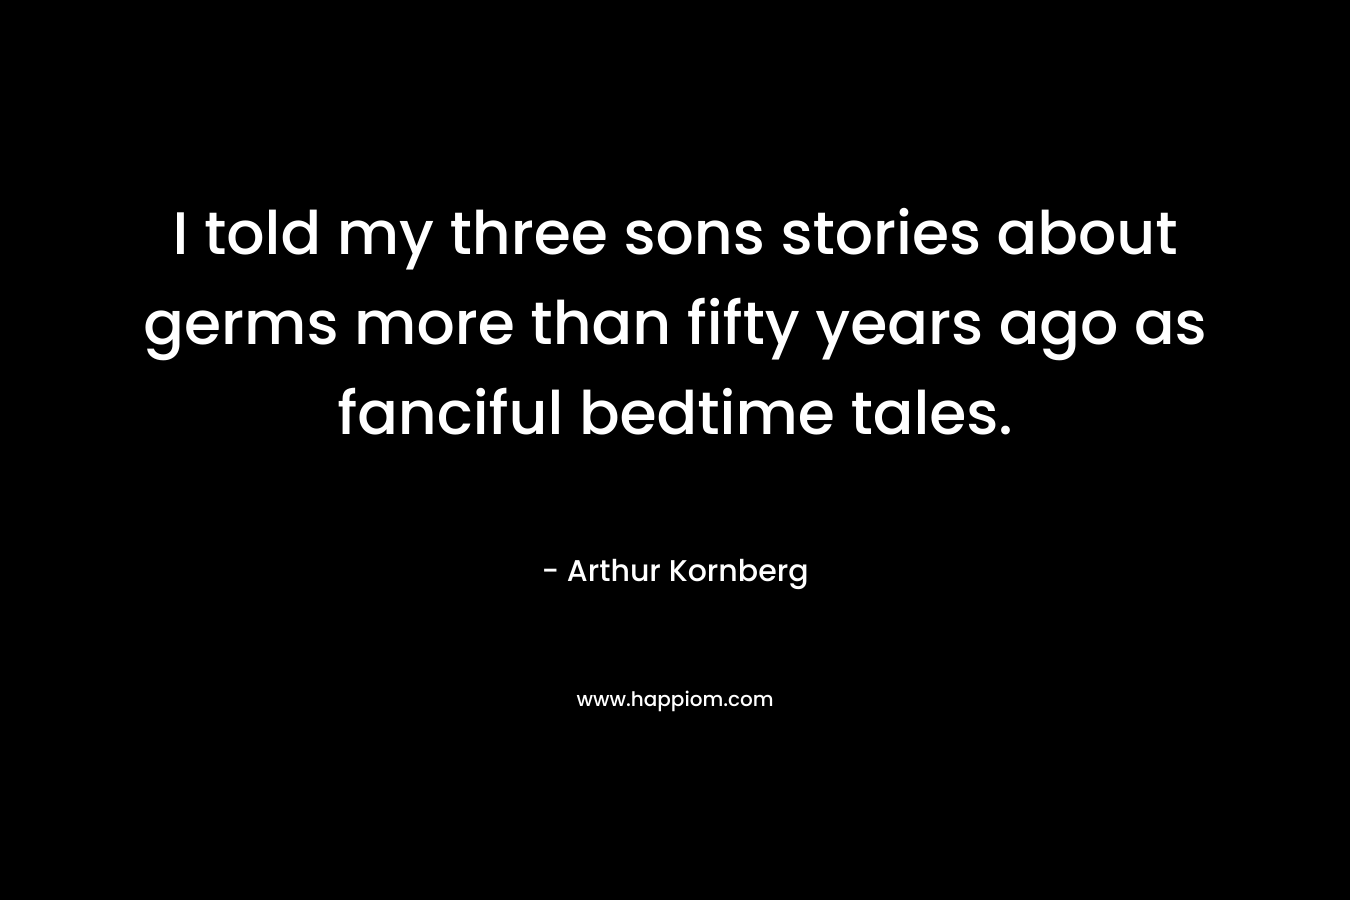 I told my three sons stories about germs more than fifty years ago as fanciful bedtime tales.